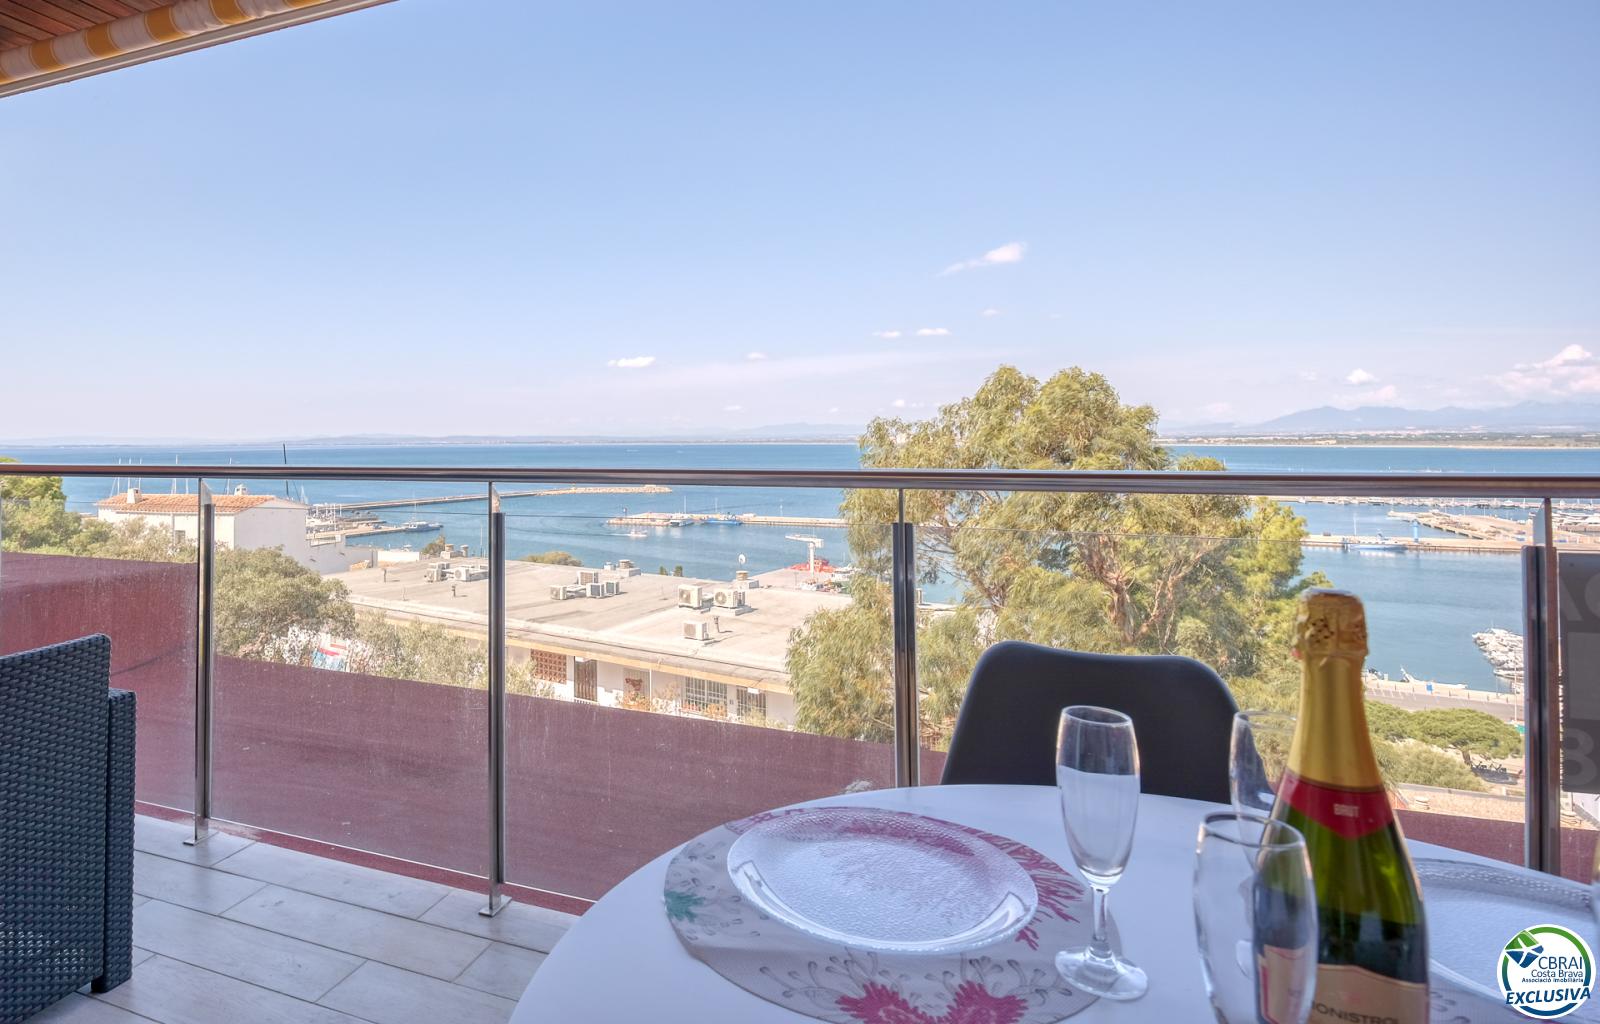 Apartment in the port area of Roses with stunning sea views